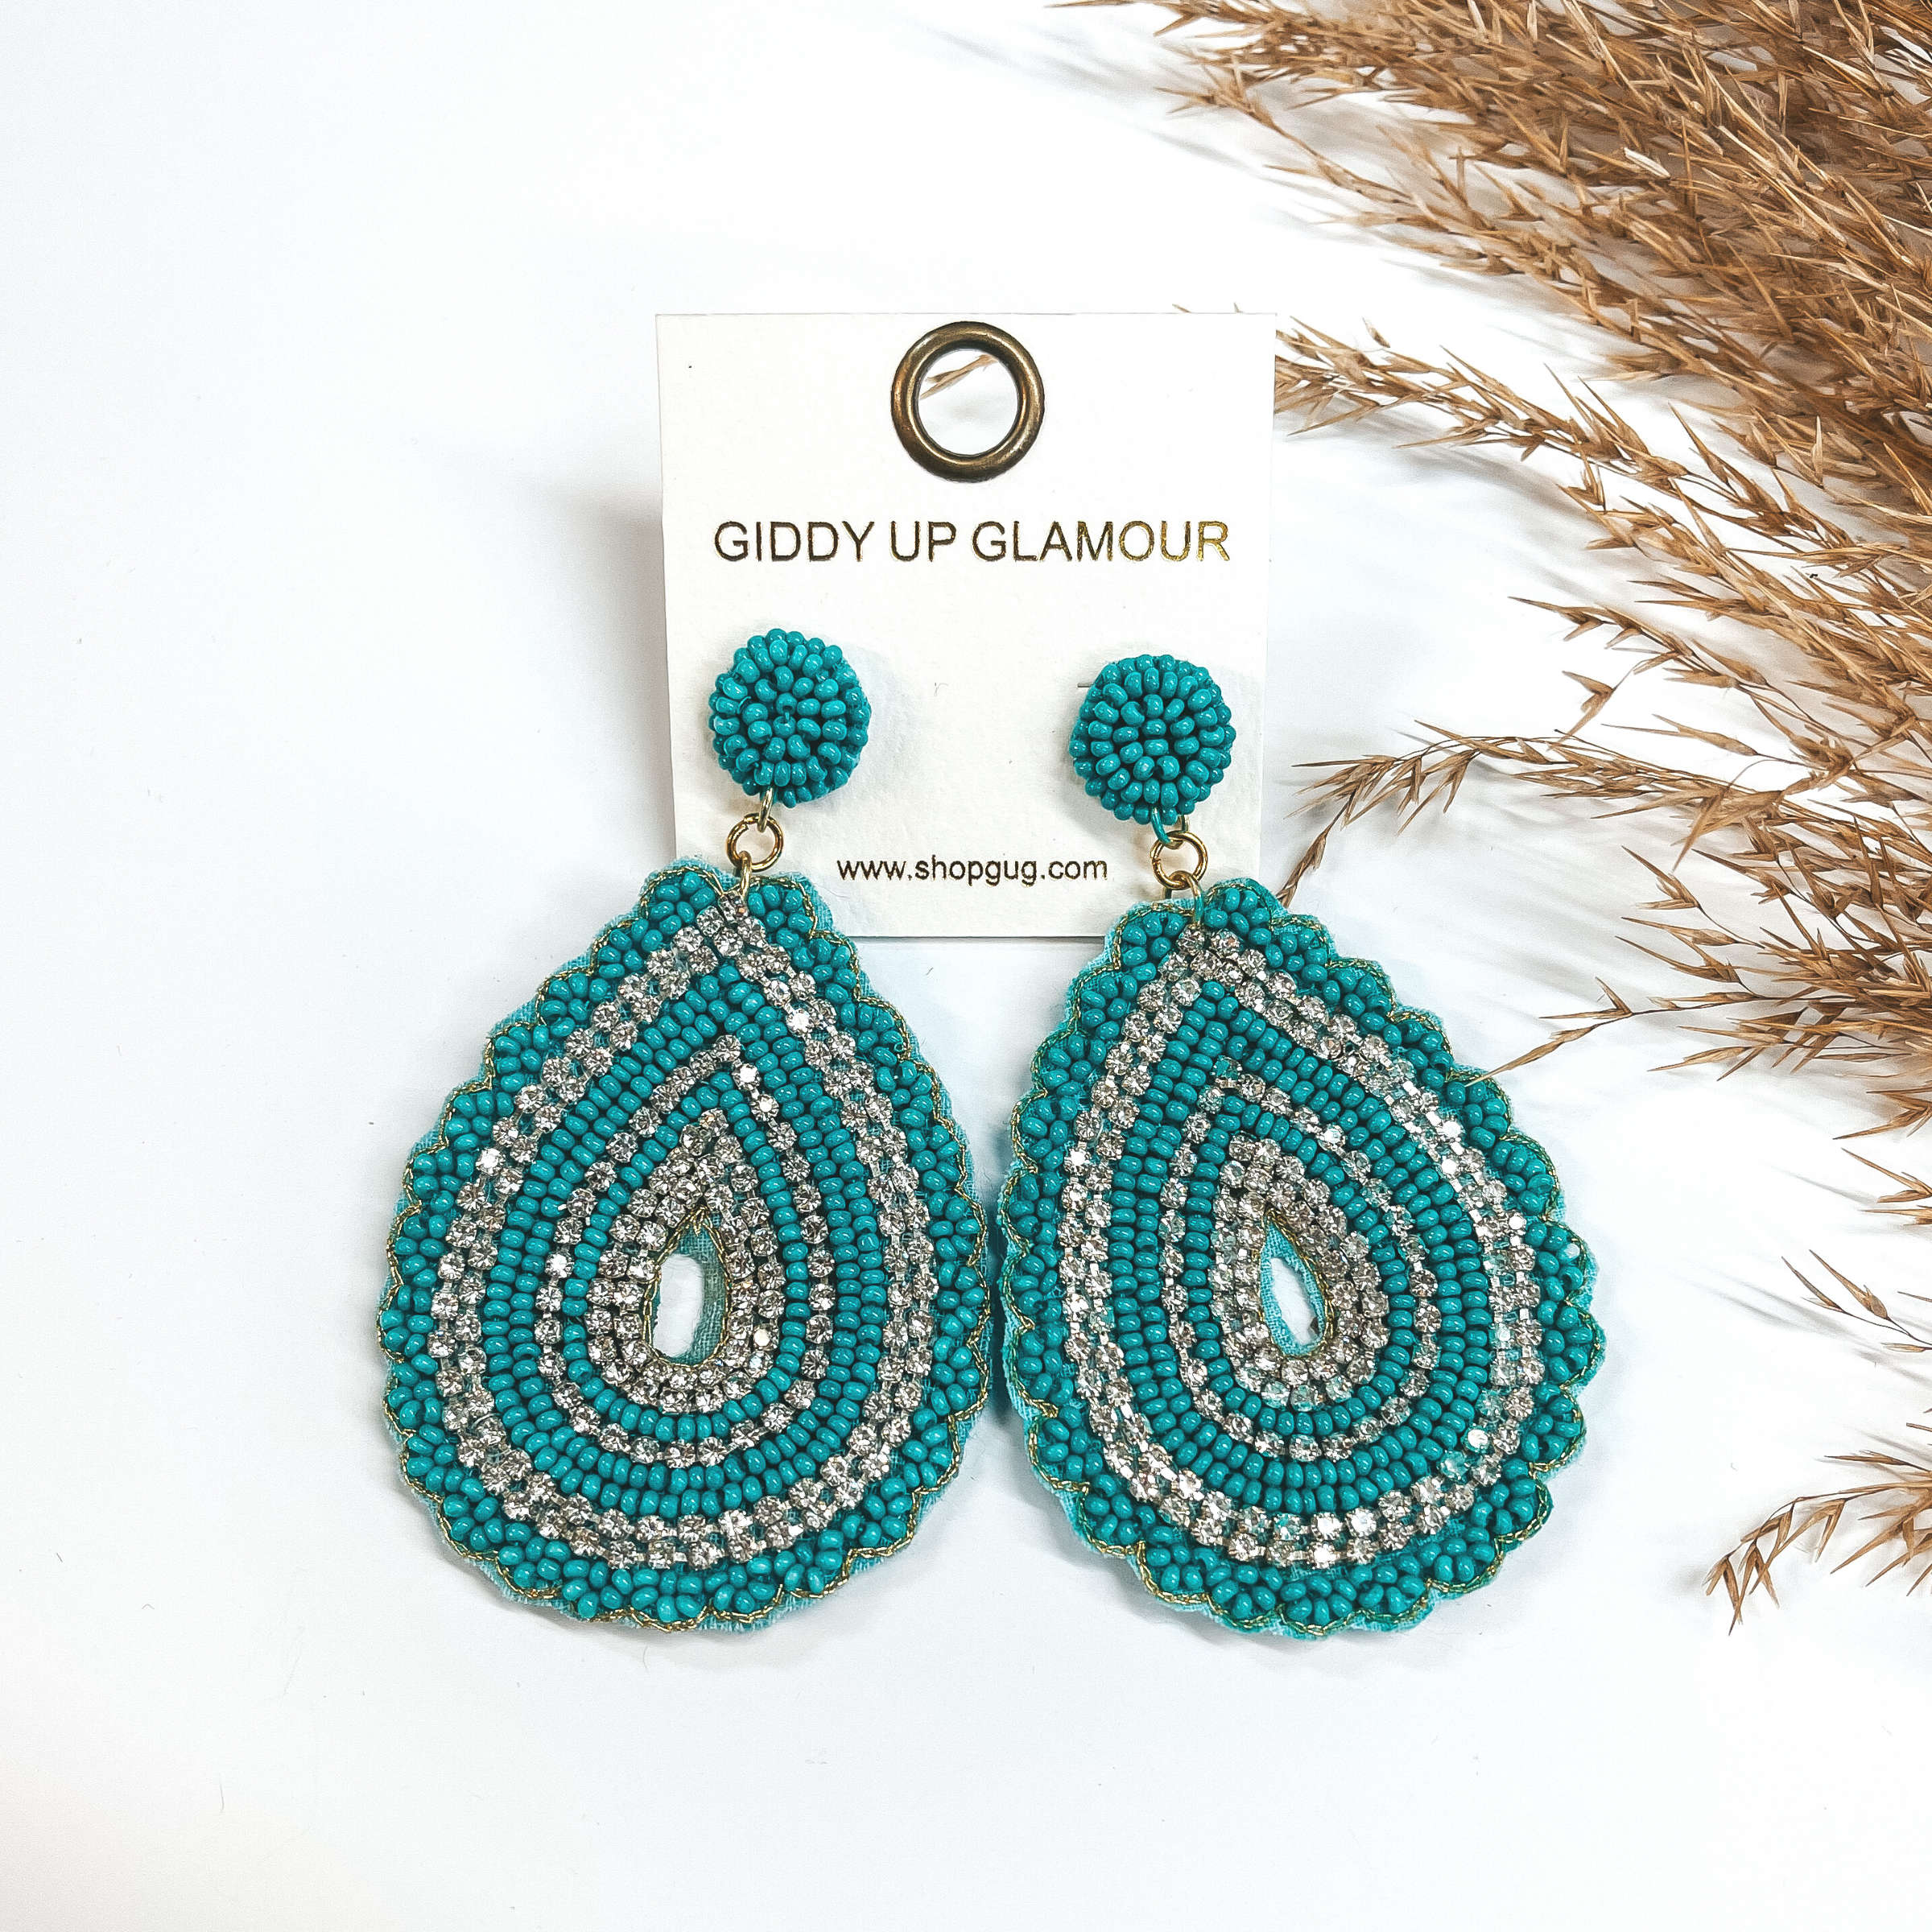 These earrings are wide teardrop earrings with bumps  all around with turquoise seed beads and clear  rhinestones. These earrings are taken on a white  background and a brown plant in the side as decor.